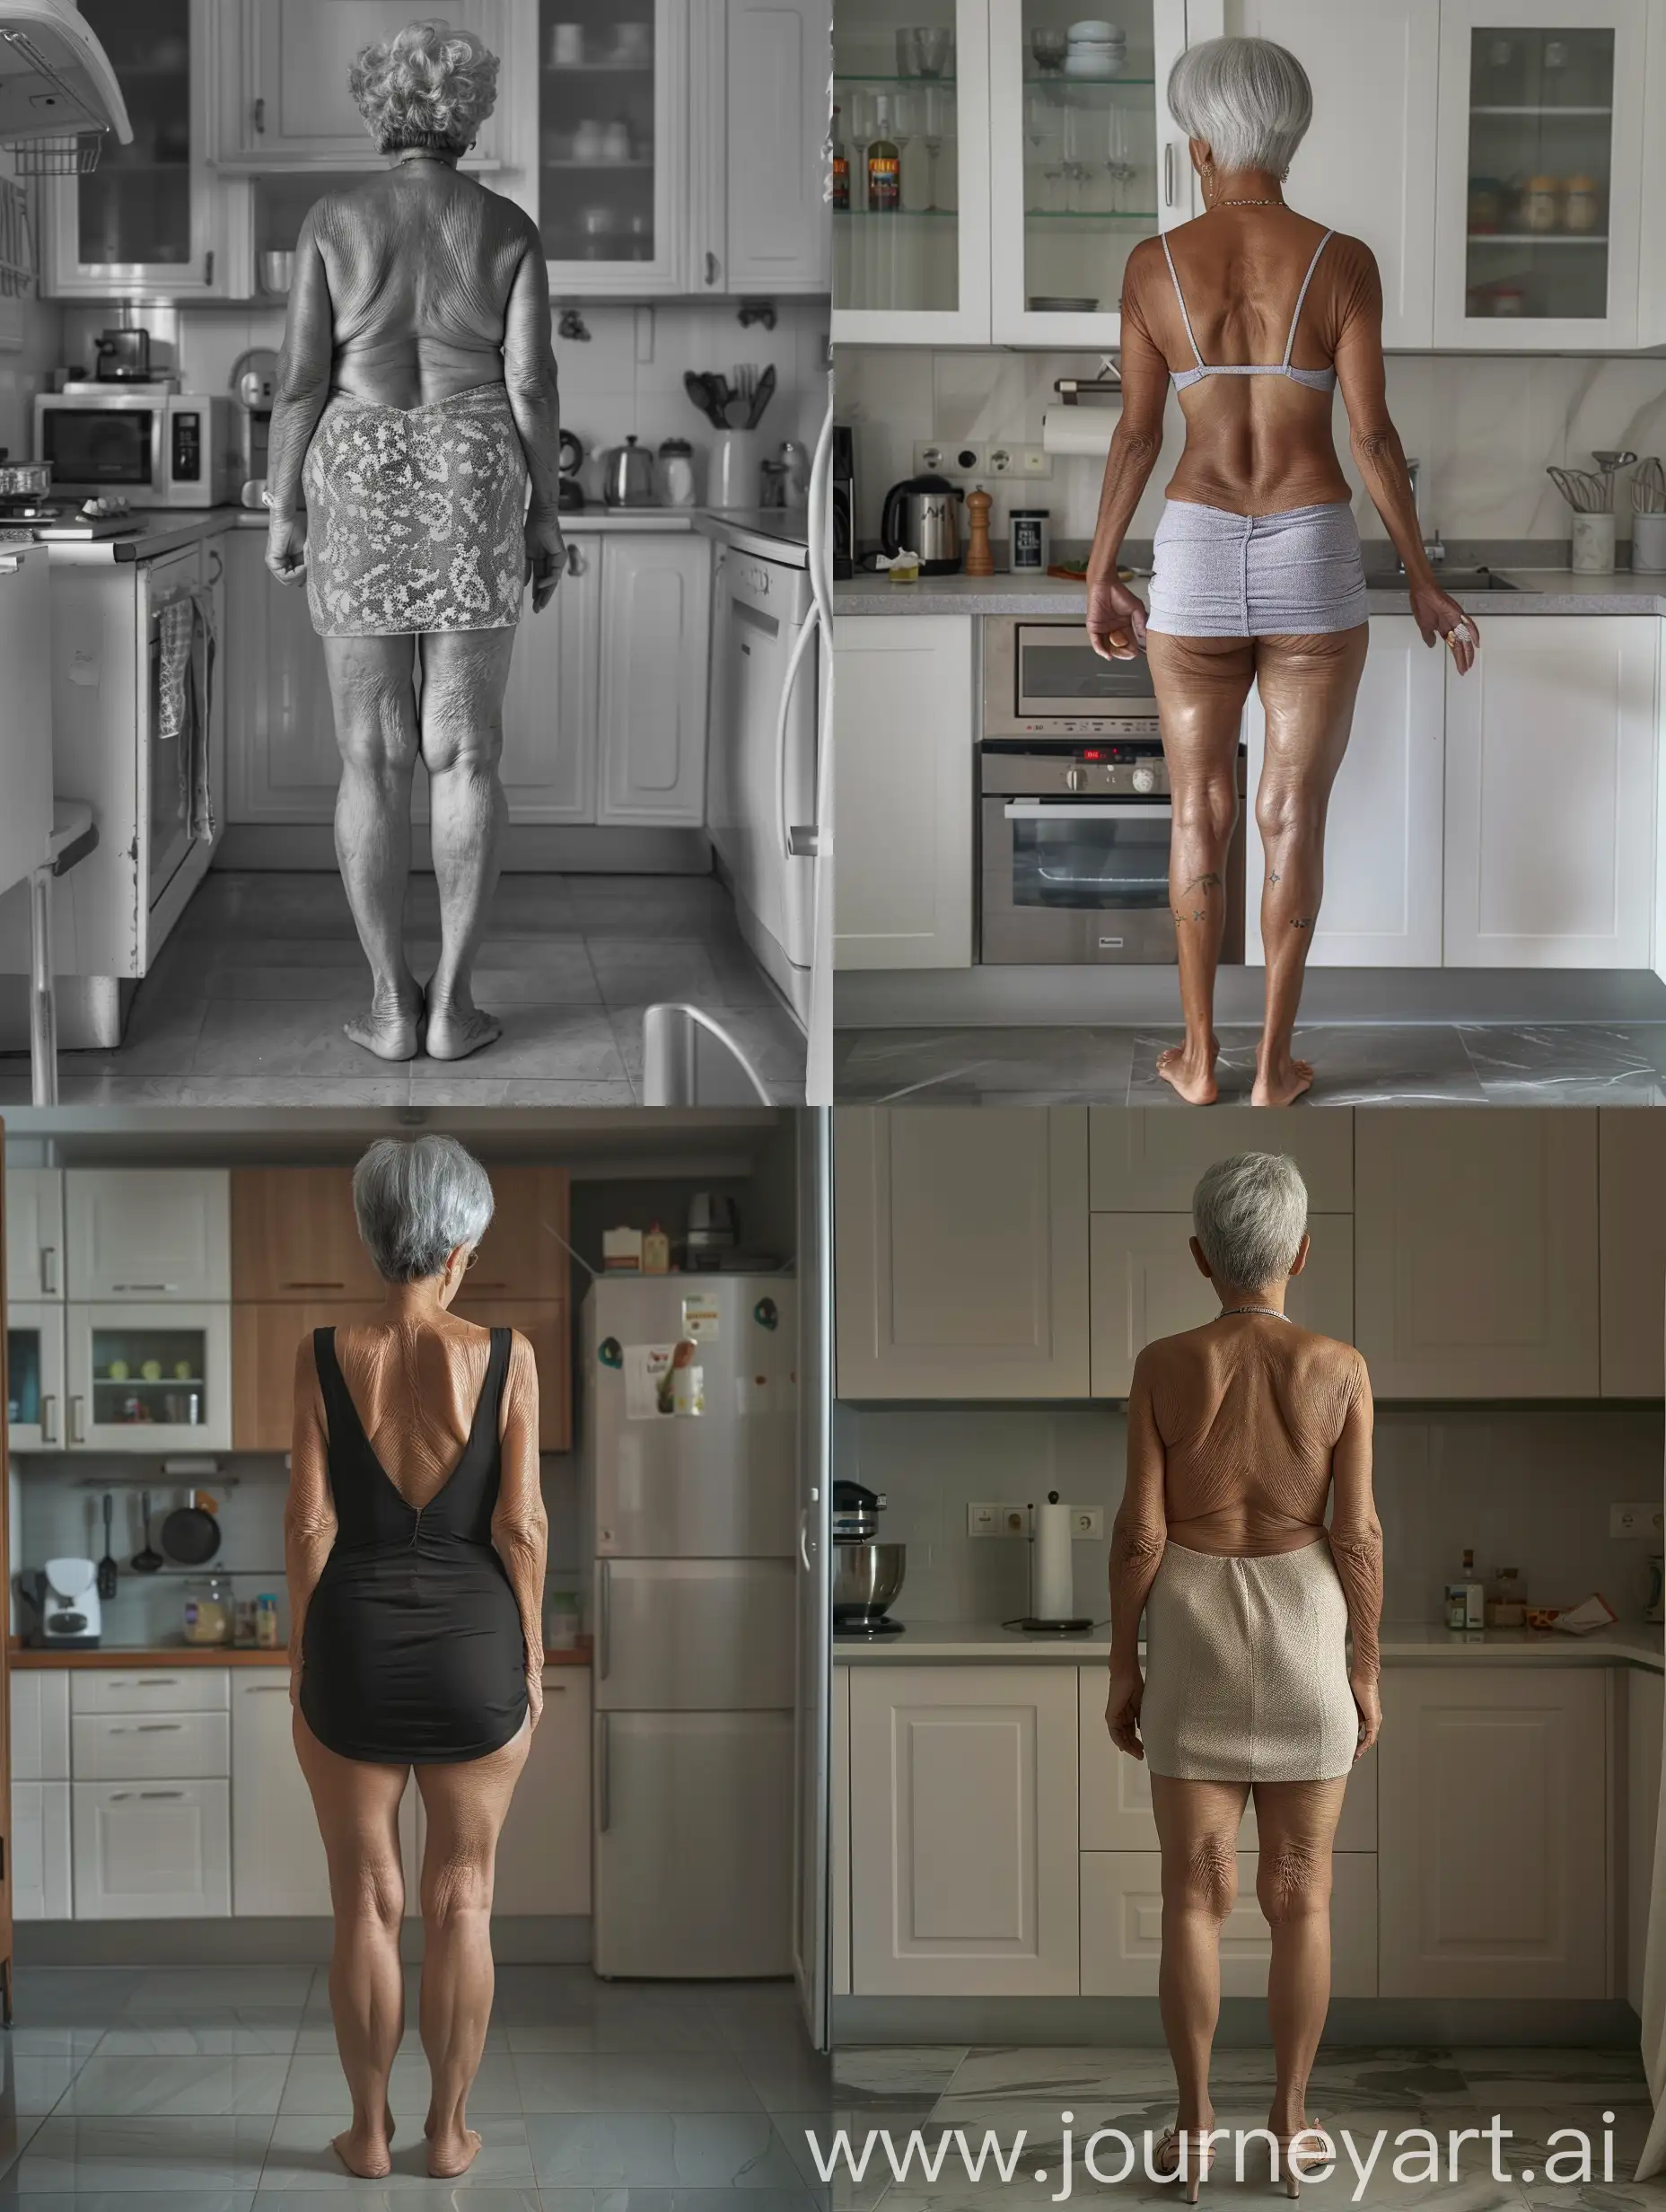 60yo algerian mature woman, kitchen, standing, super mini dress, high hells, ,chesty, thick muscle calves, full body view from toe to head, full body in frame, ultra wide angle shot, head and feet in the frame, full body rear view, full body shot, capture full body